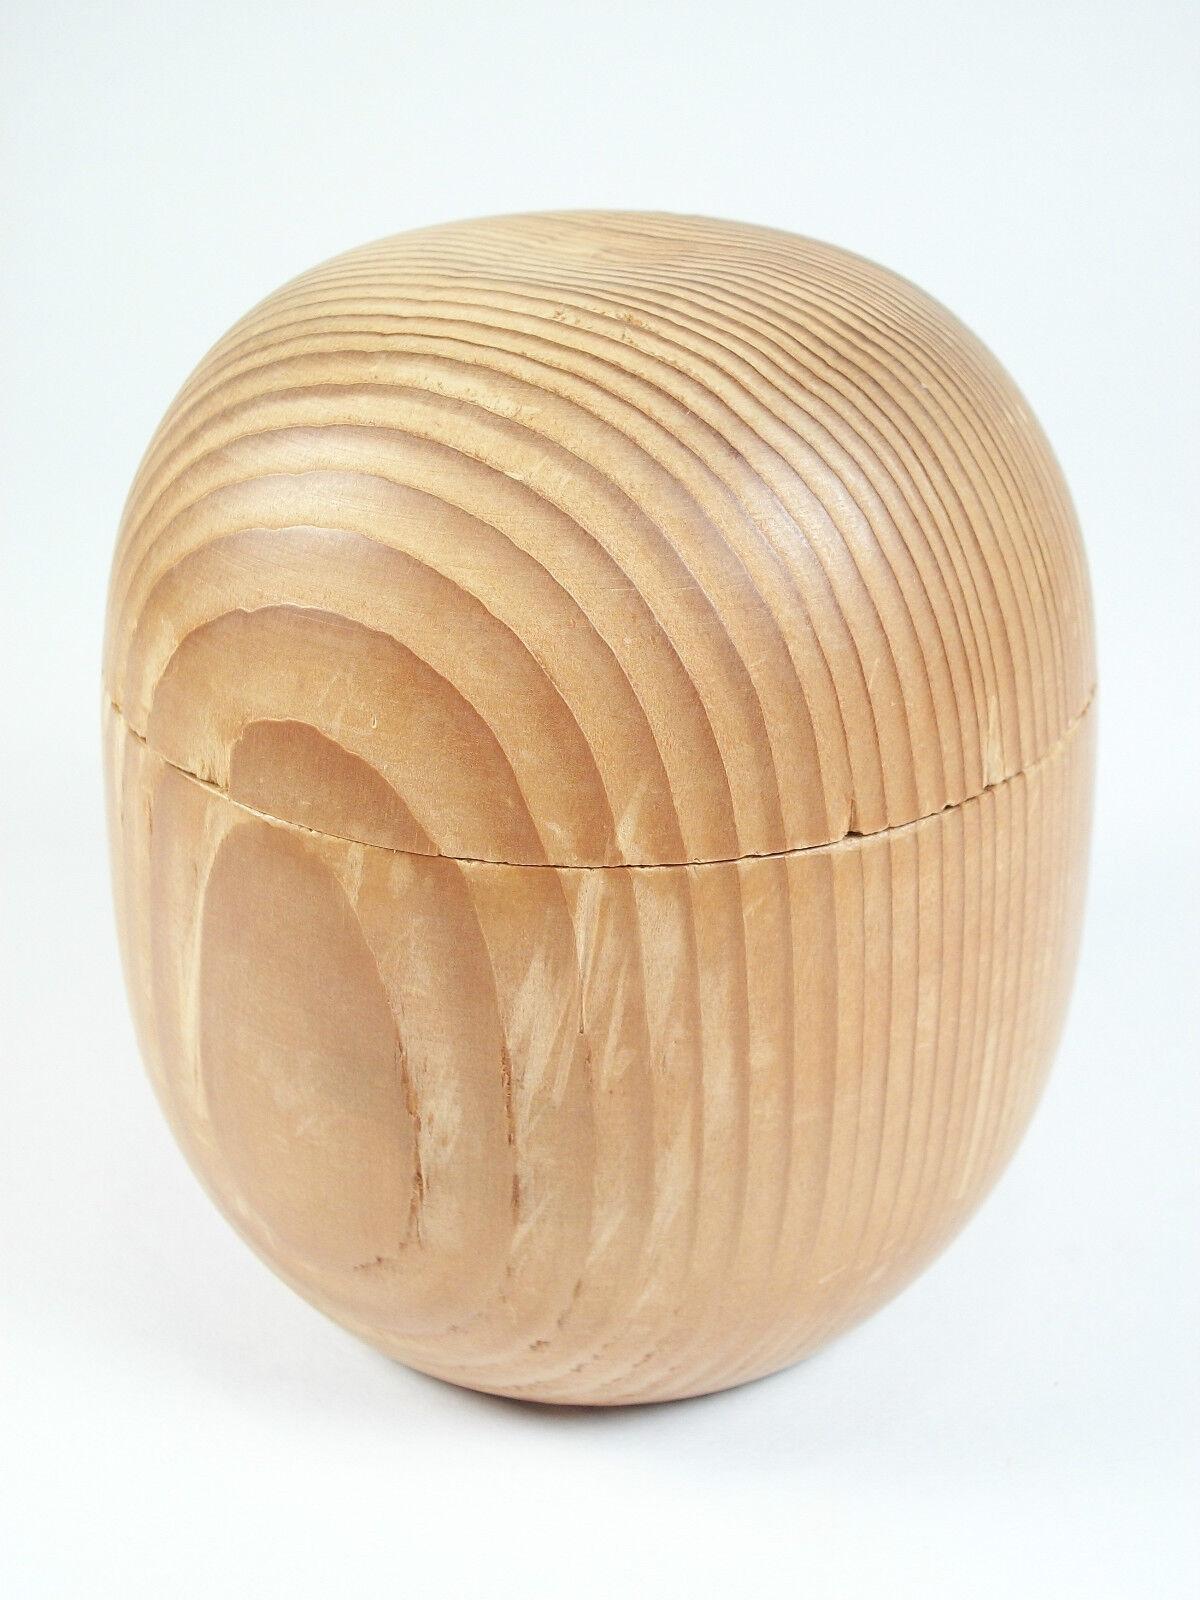 Antique Scandinavian Pine Canister, Treen Ware, Early 20th Century For Sale 1